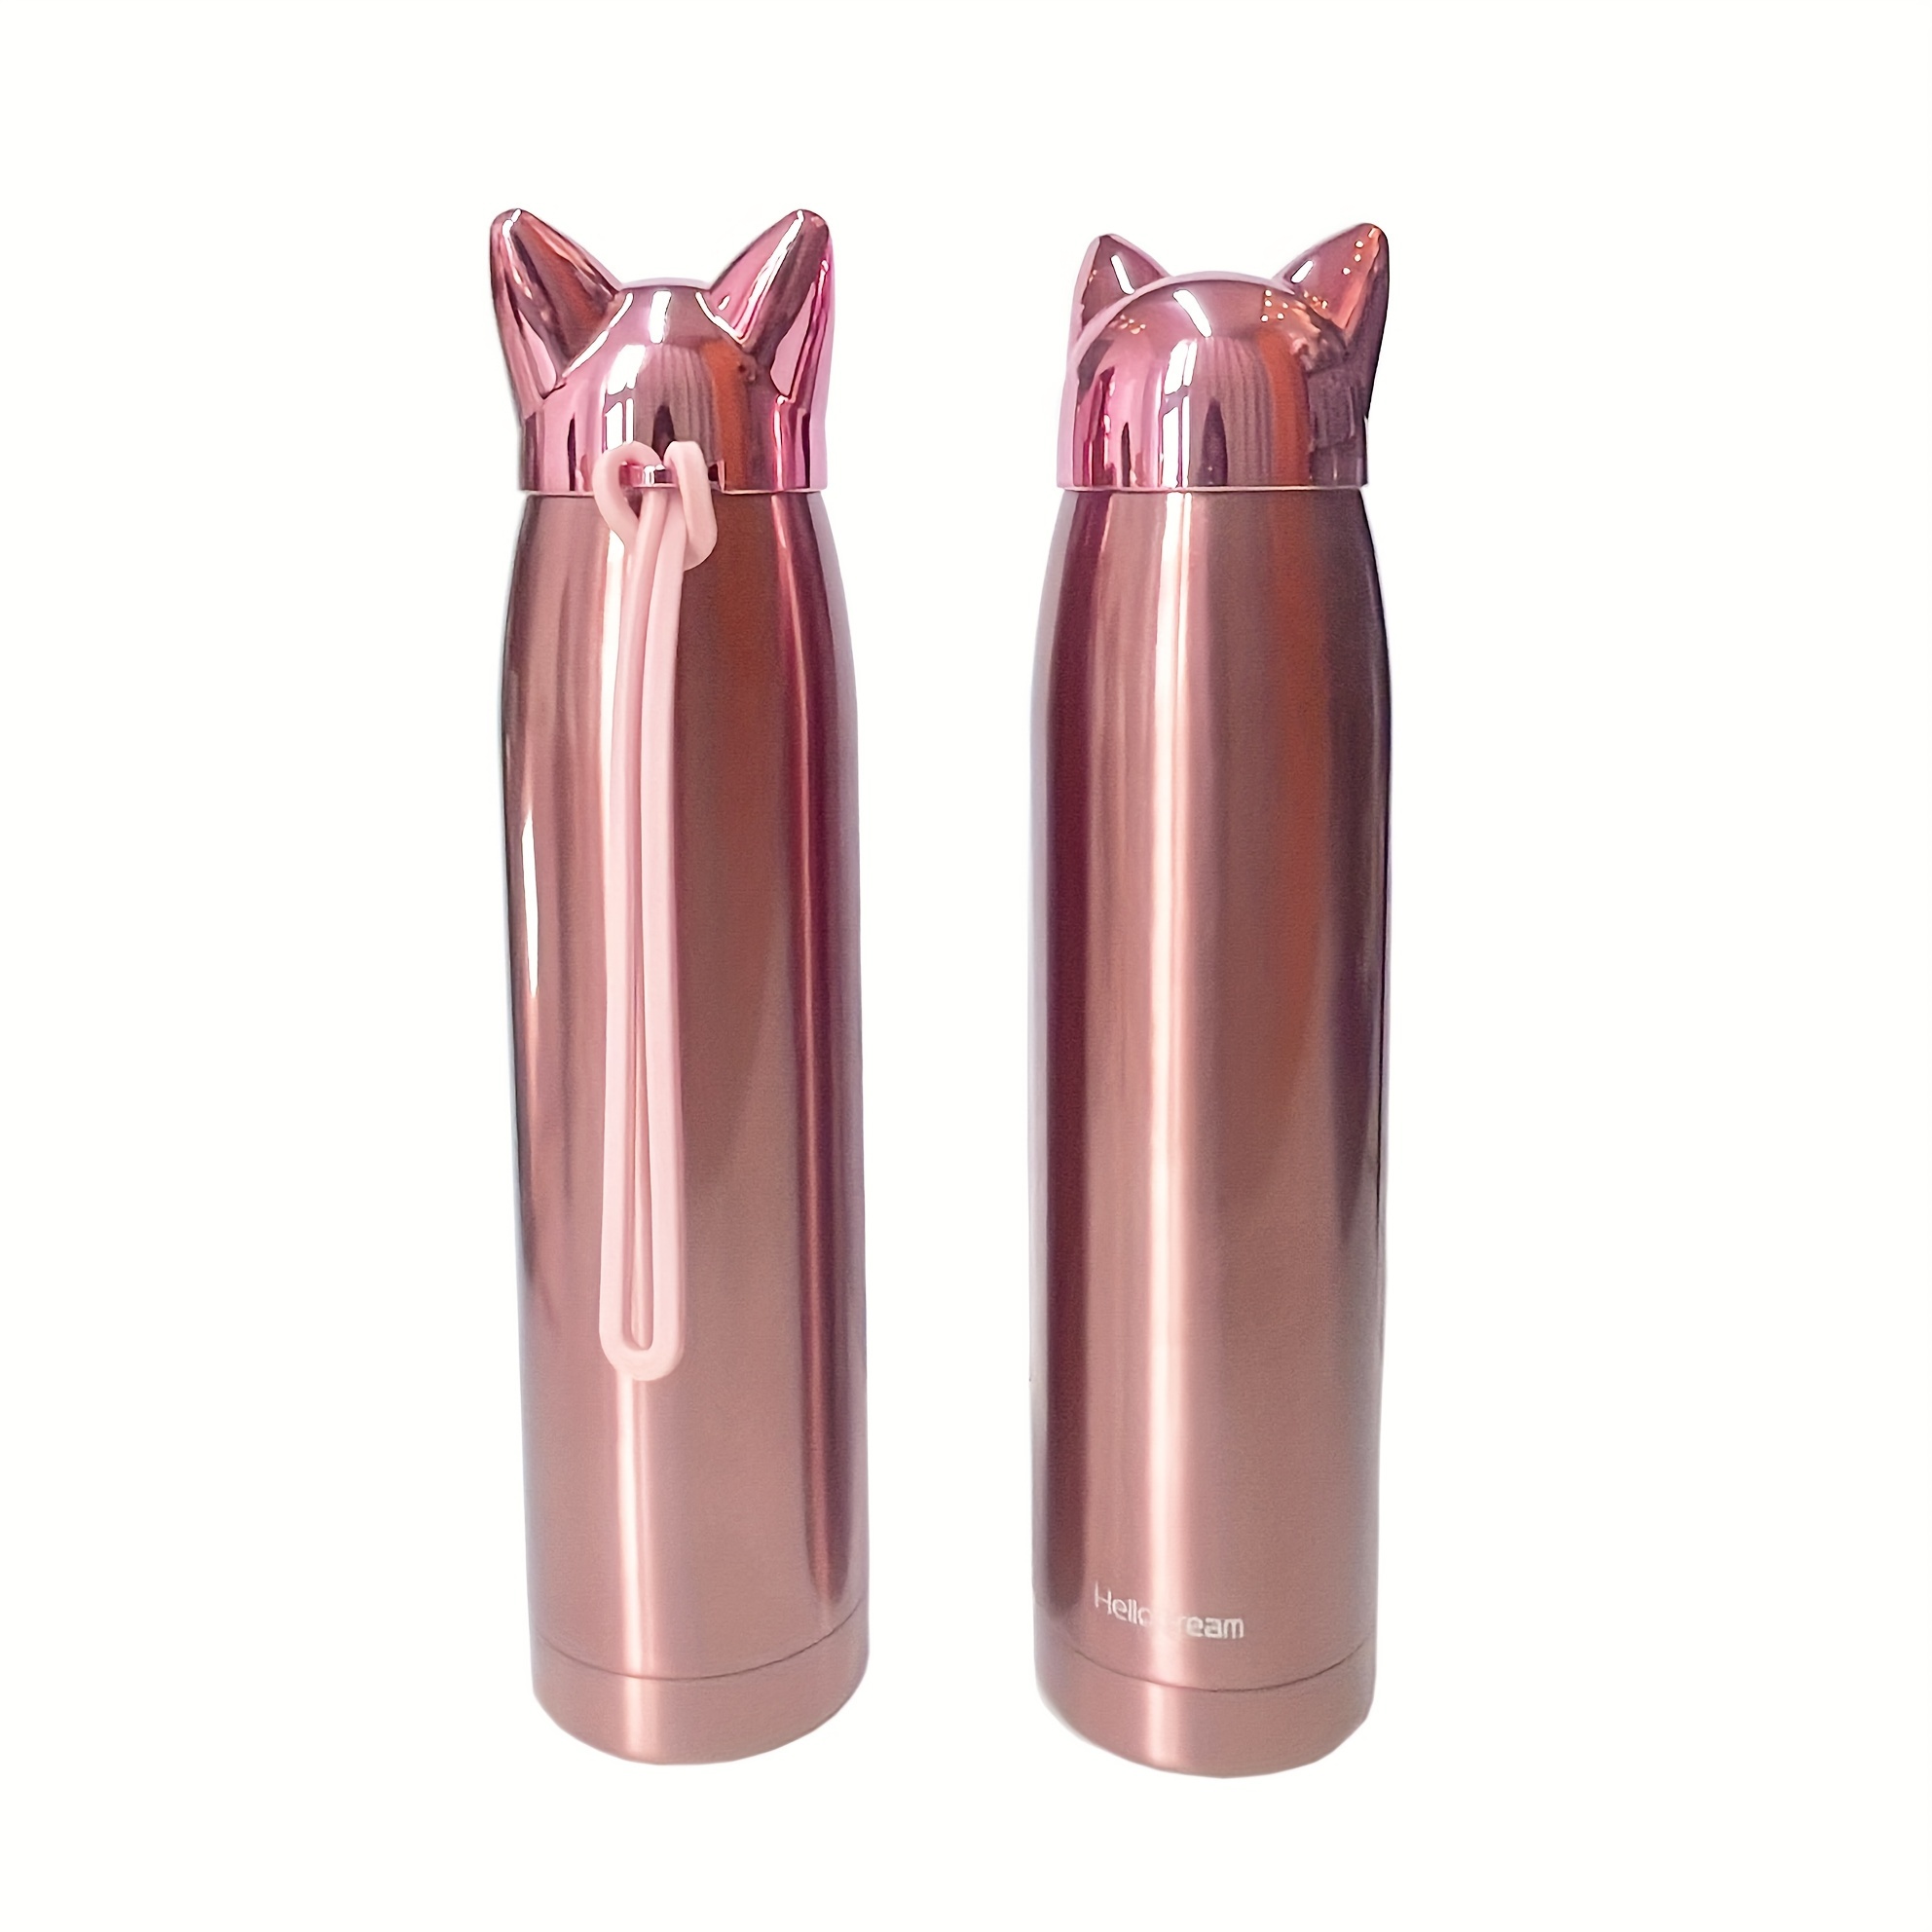 Cute Cat Water Bottle, Stainless Steel Insulated Water Bottles